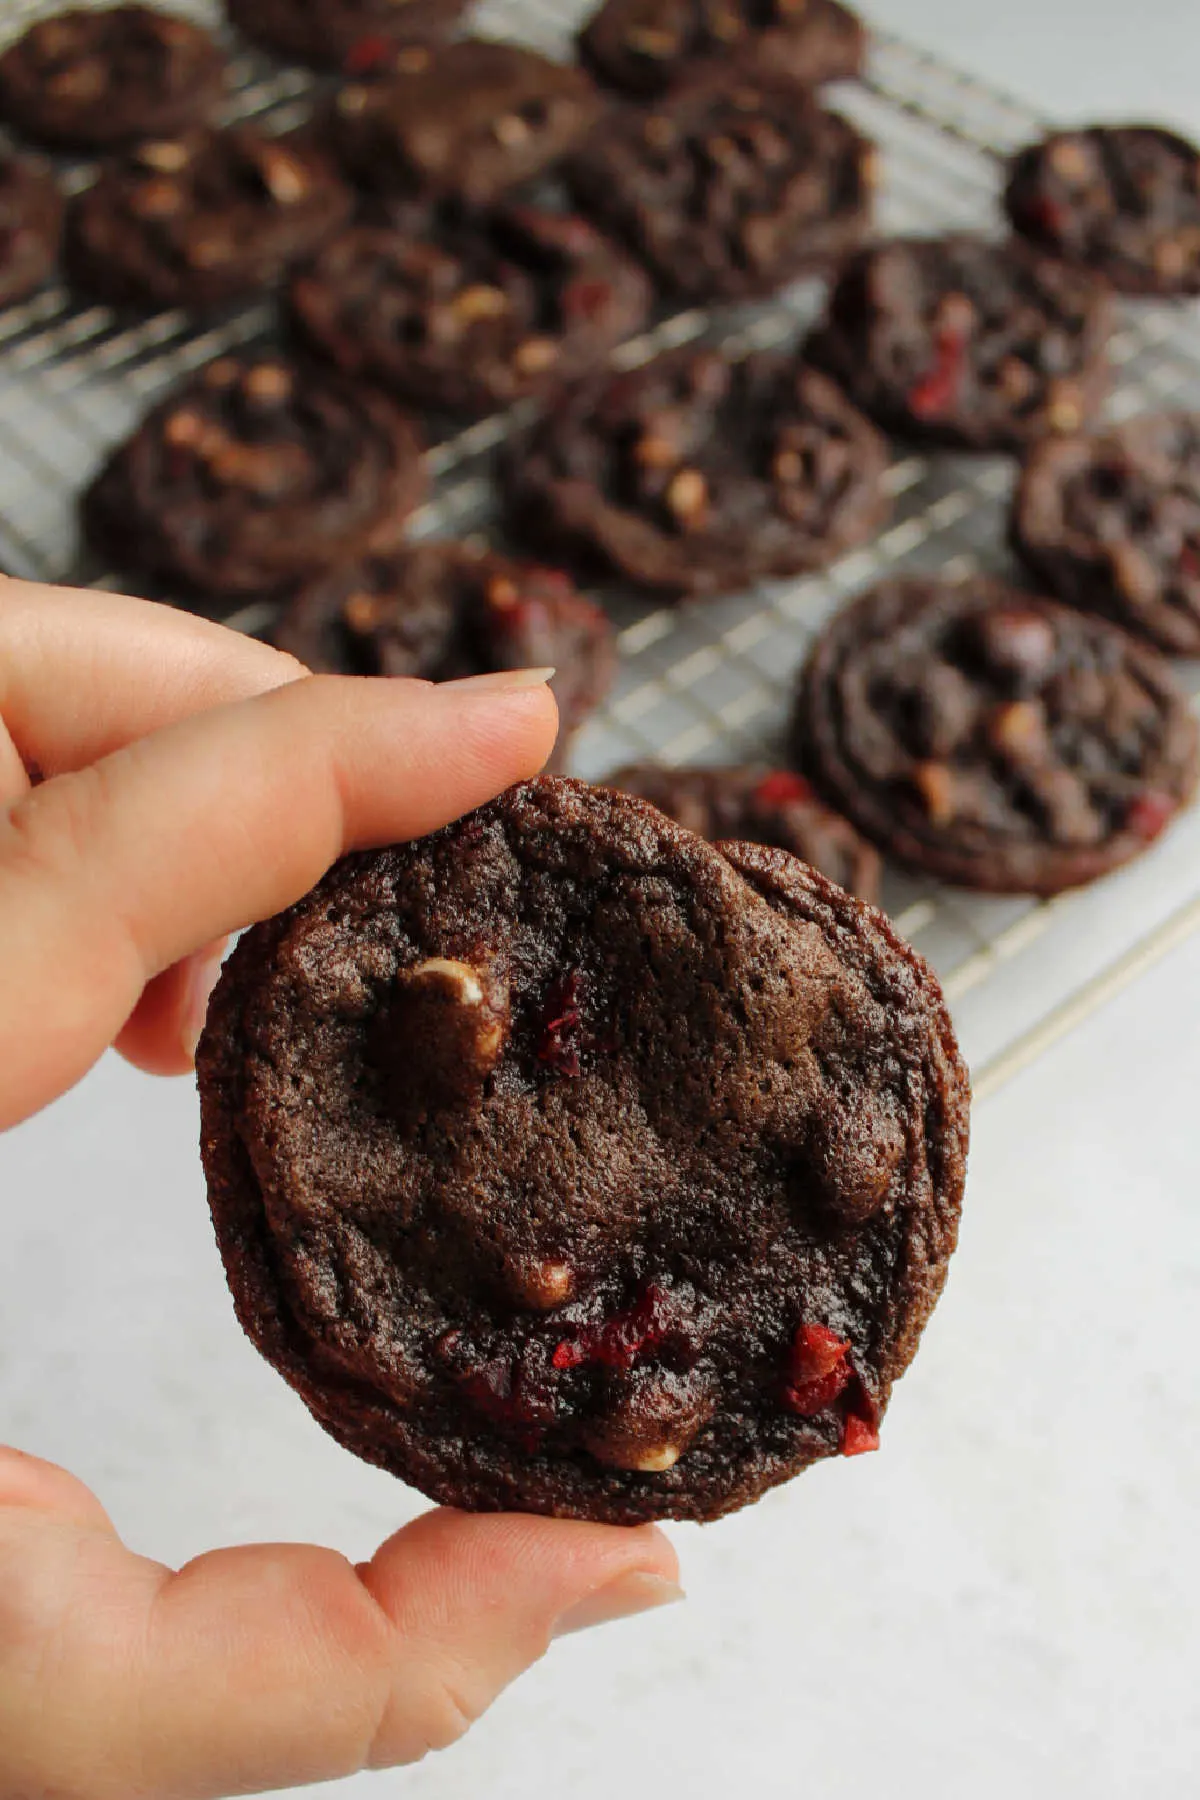 Hand holding chocolate cookie with white chocolate chips and bits of cherries in it with more cookies cooling on wire rack in the background.